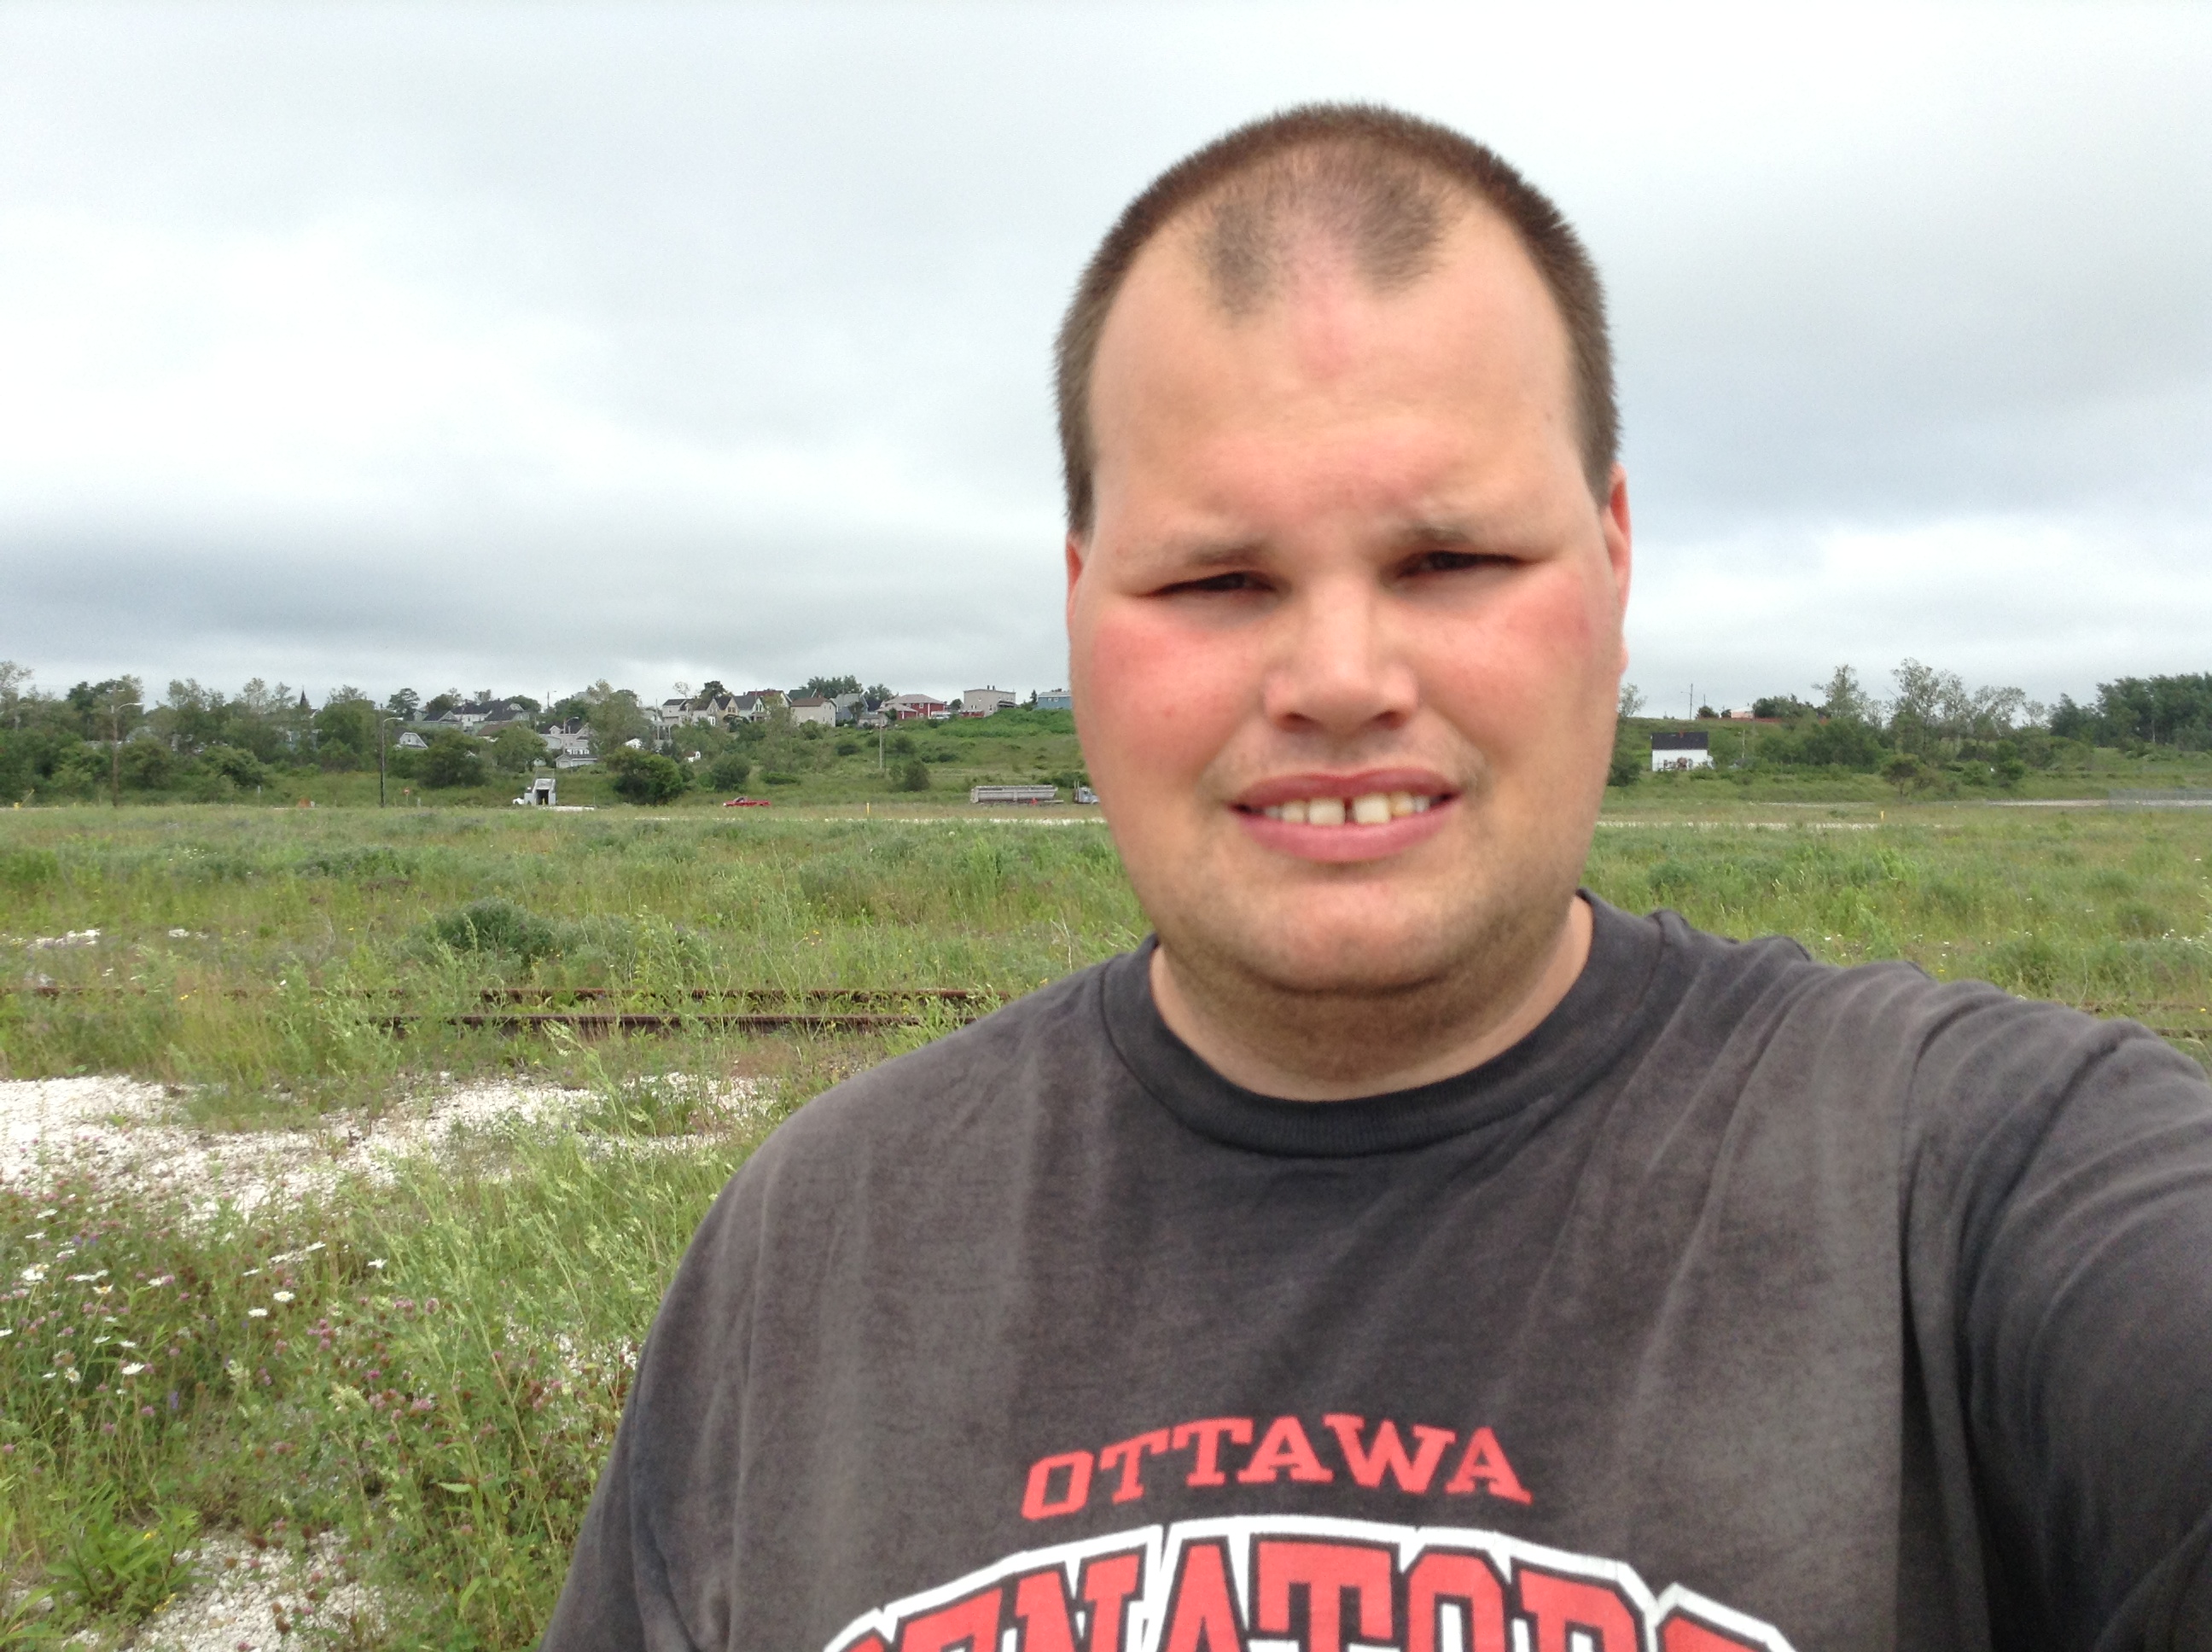 Frankie MacDonald is enjoying the Nice Summer Day and it is muggy and humid outside and he is going for a walk.